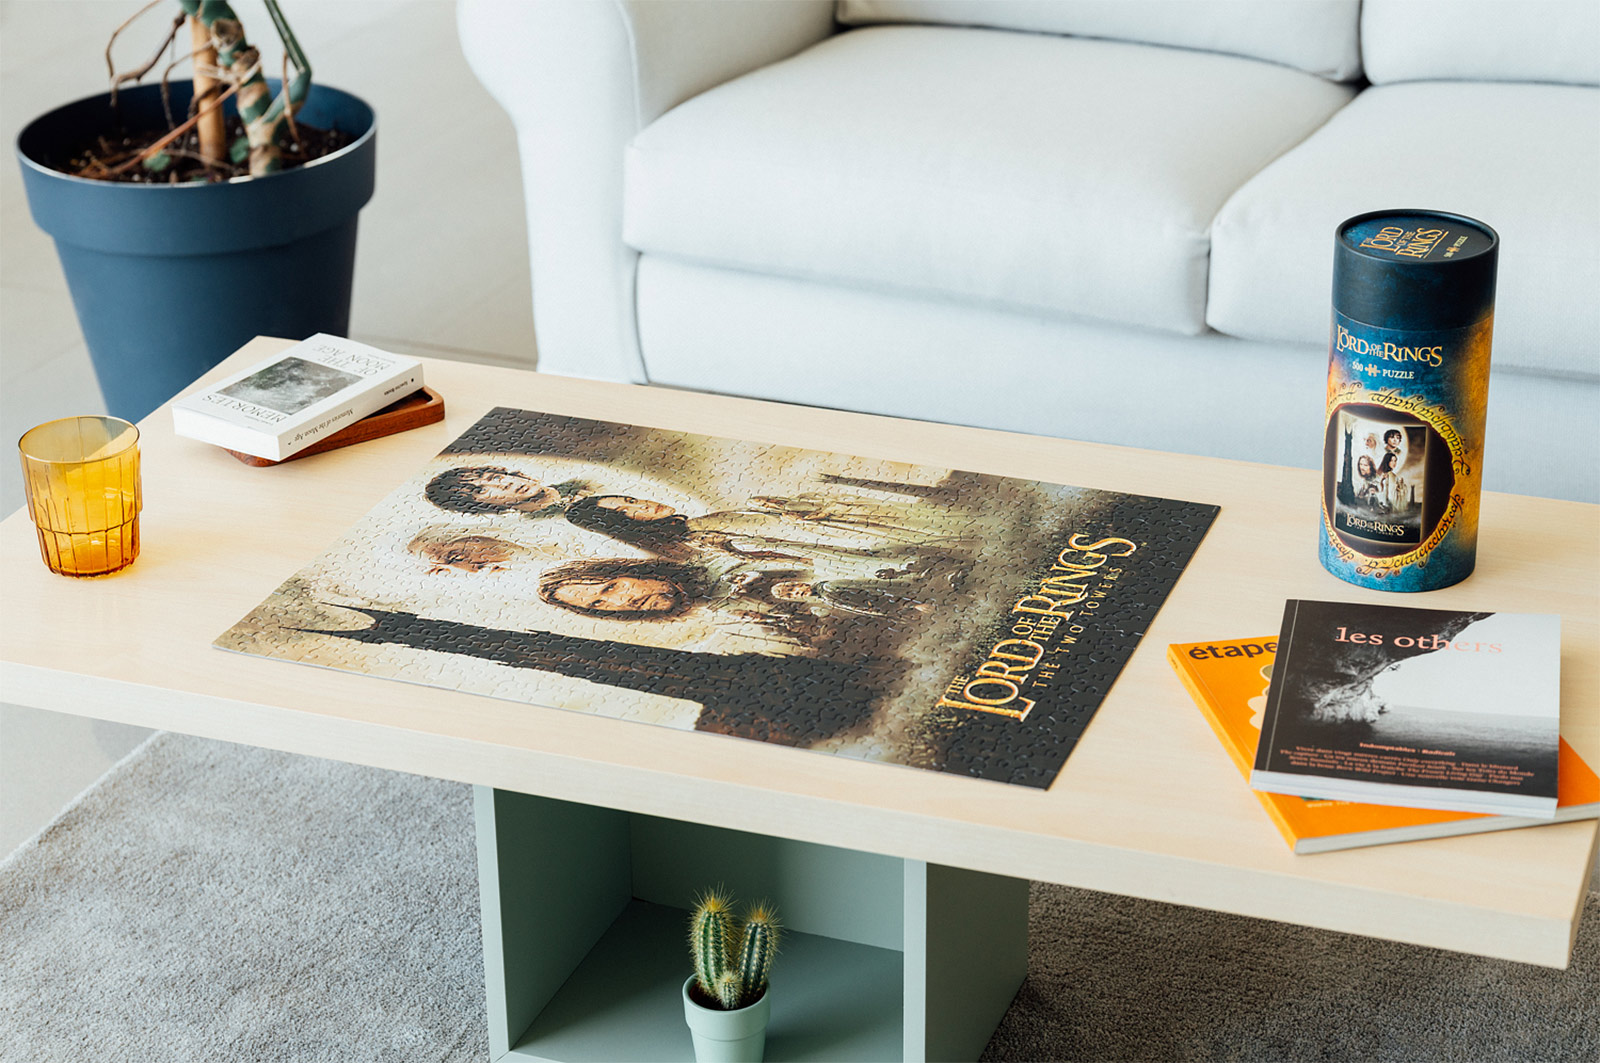 Lord of the Rings - The Two Towers Puzzle